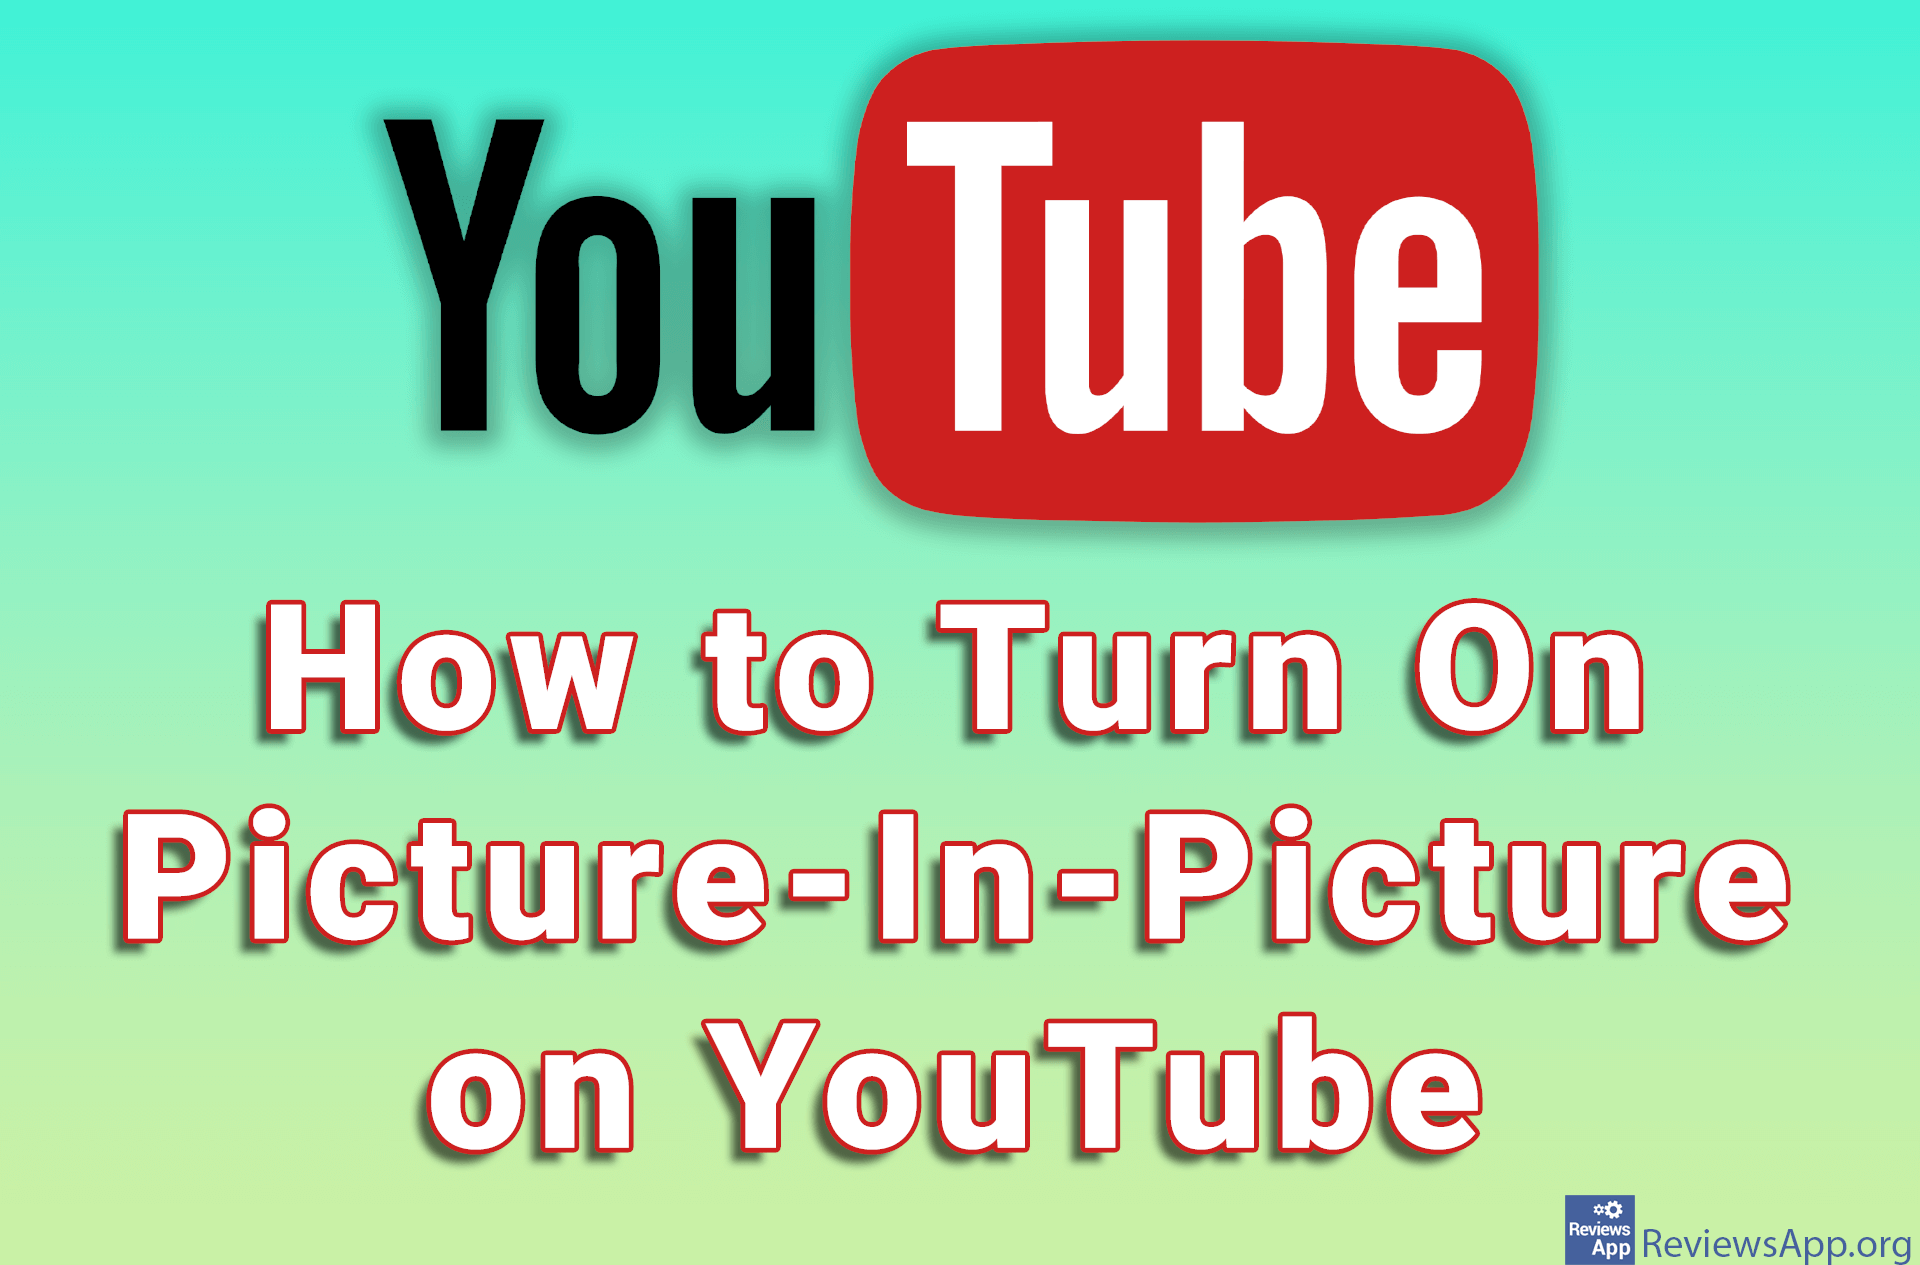 How to Turn On Picture-In-Picture on YouTube